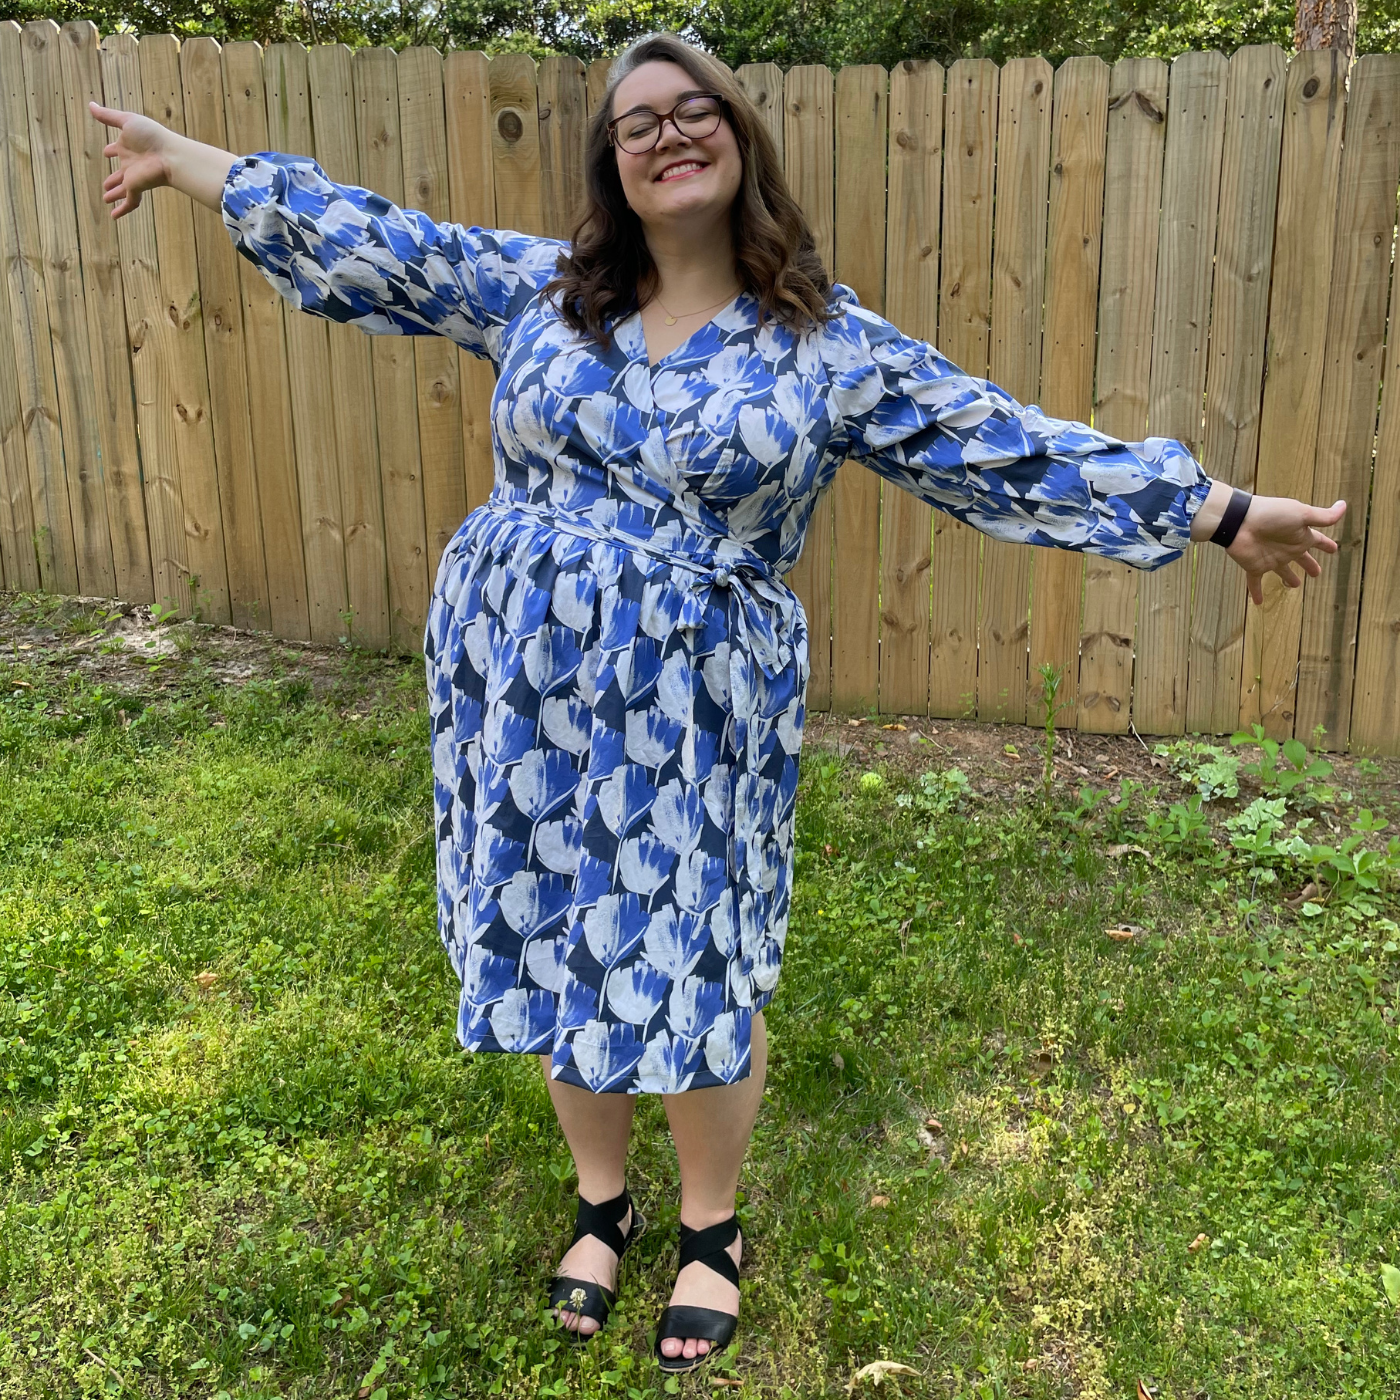 MaryAshlyn stands smiling at the camera holding both of her arms out straight. She is standing in the grass in front of a wooden fence and is wearing a dress with repeating white and blue flowers on a navy background.